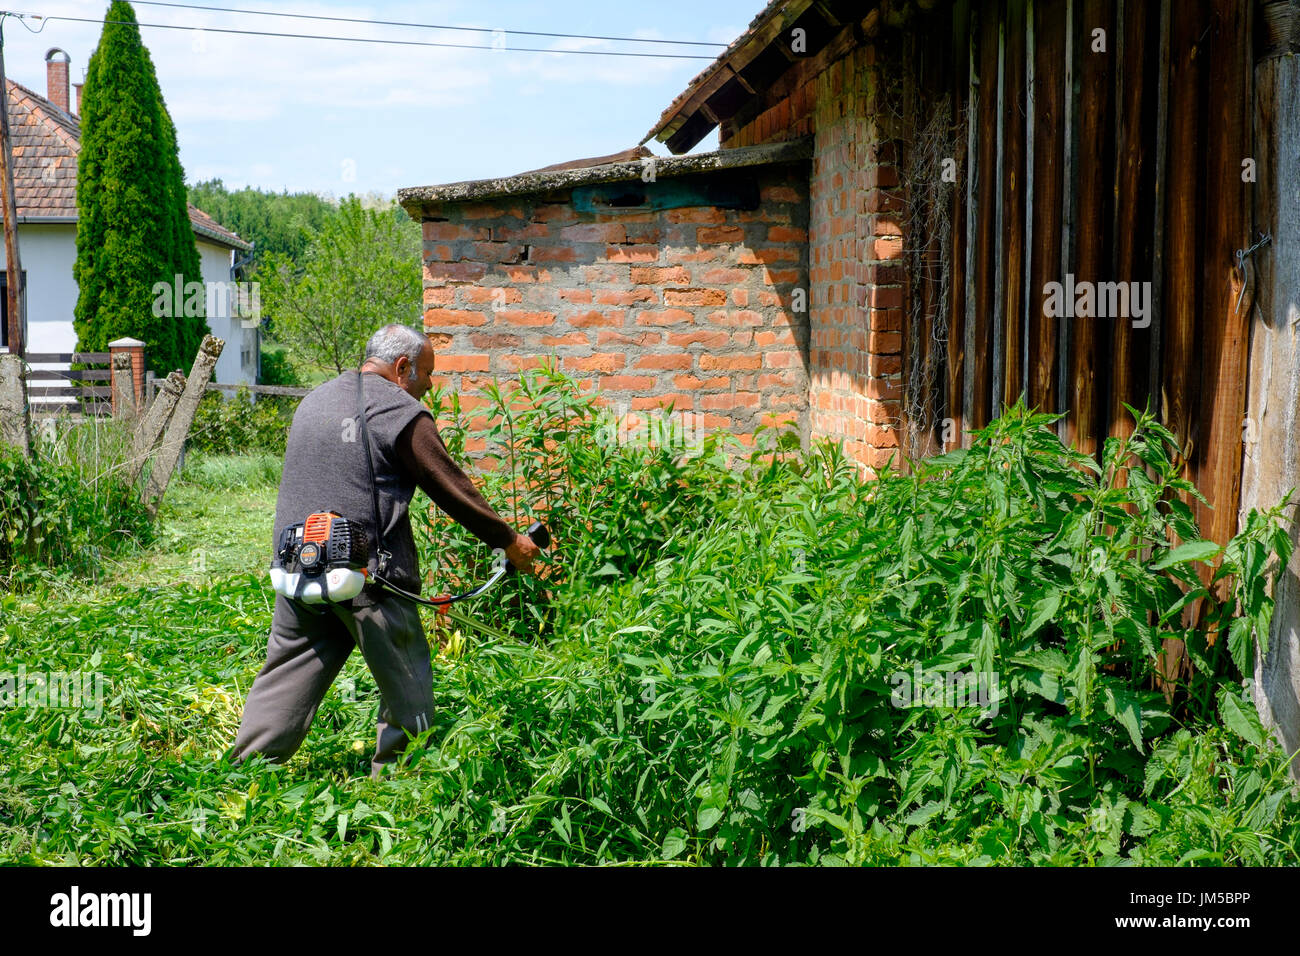 local man using a strimmer to cut long grass in the garden of a rural house in a village in zala county hungary Stock Photo